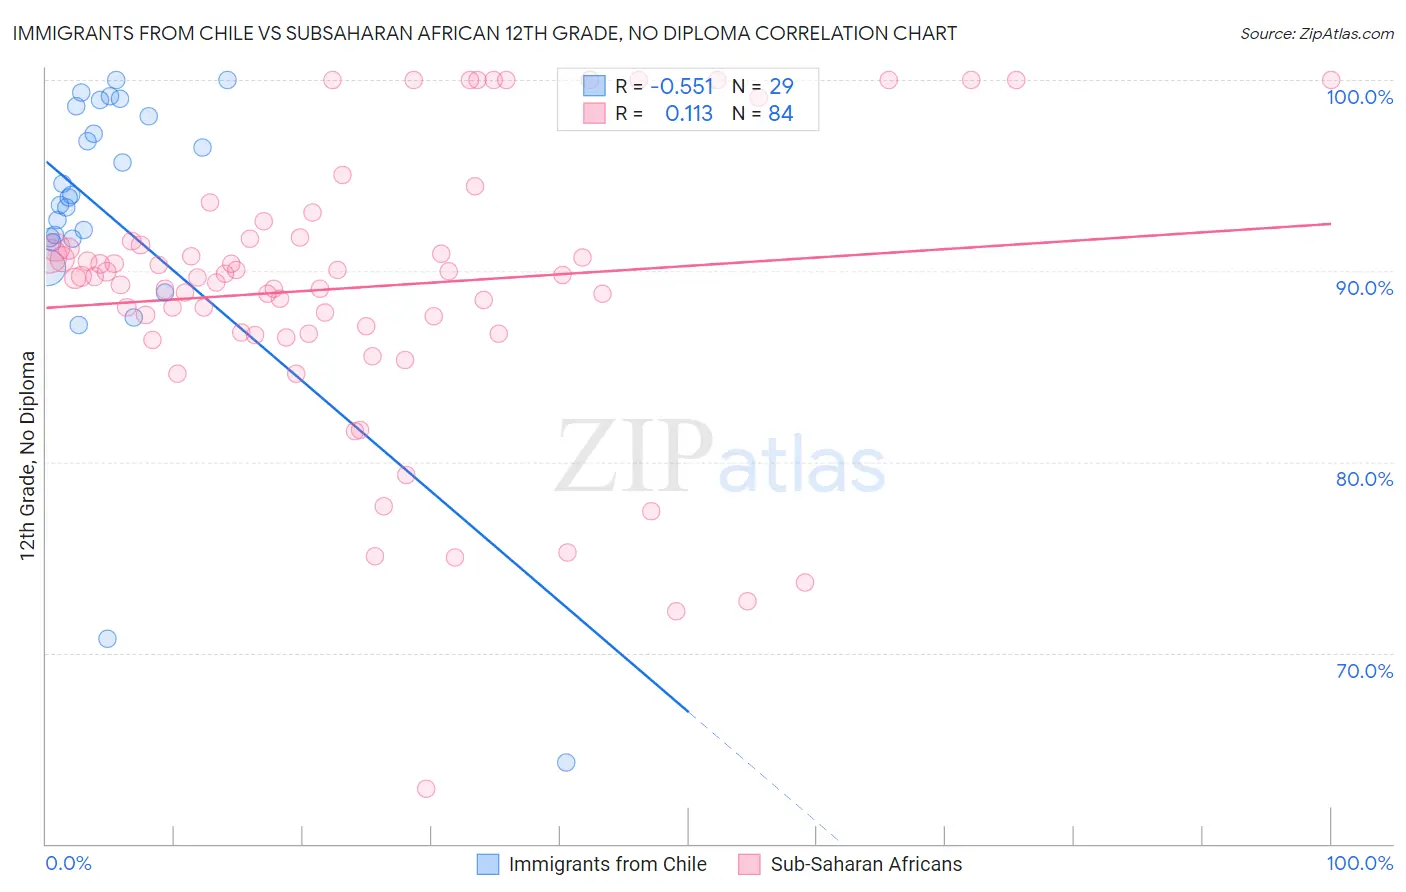 Immigrants from Chile vs Subsaharan African 12th Grade, No Diploma